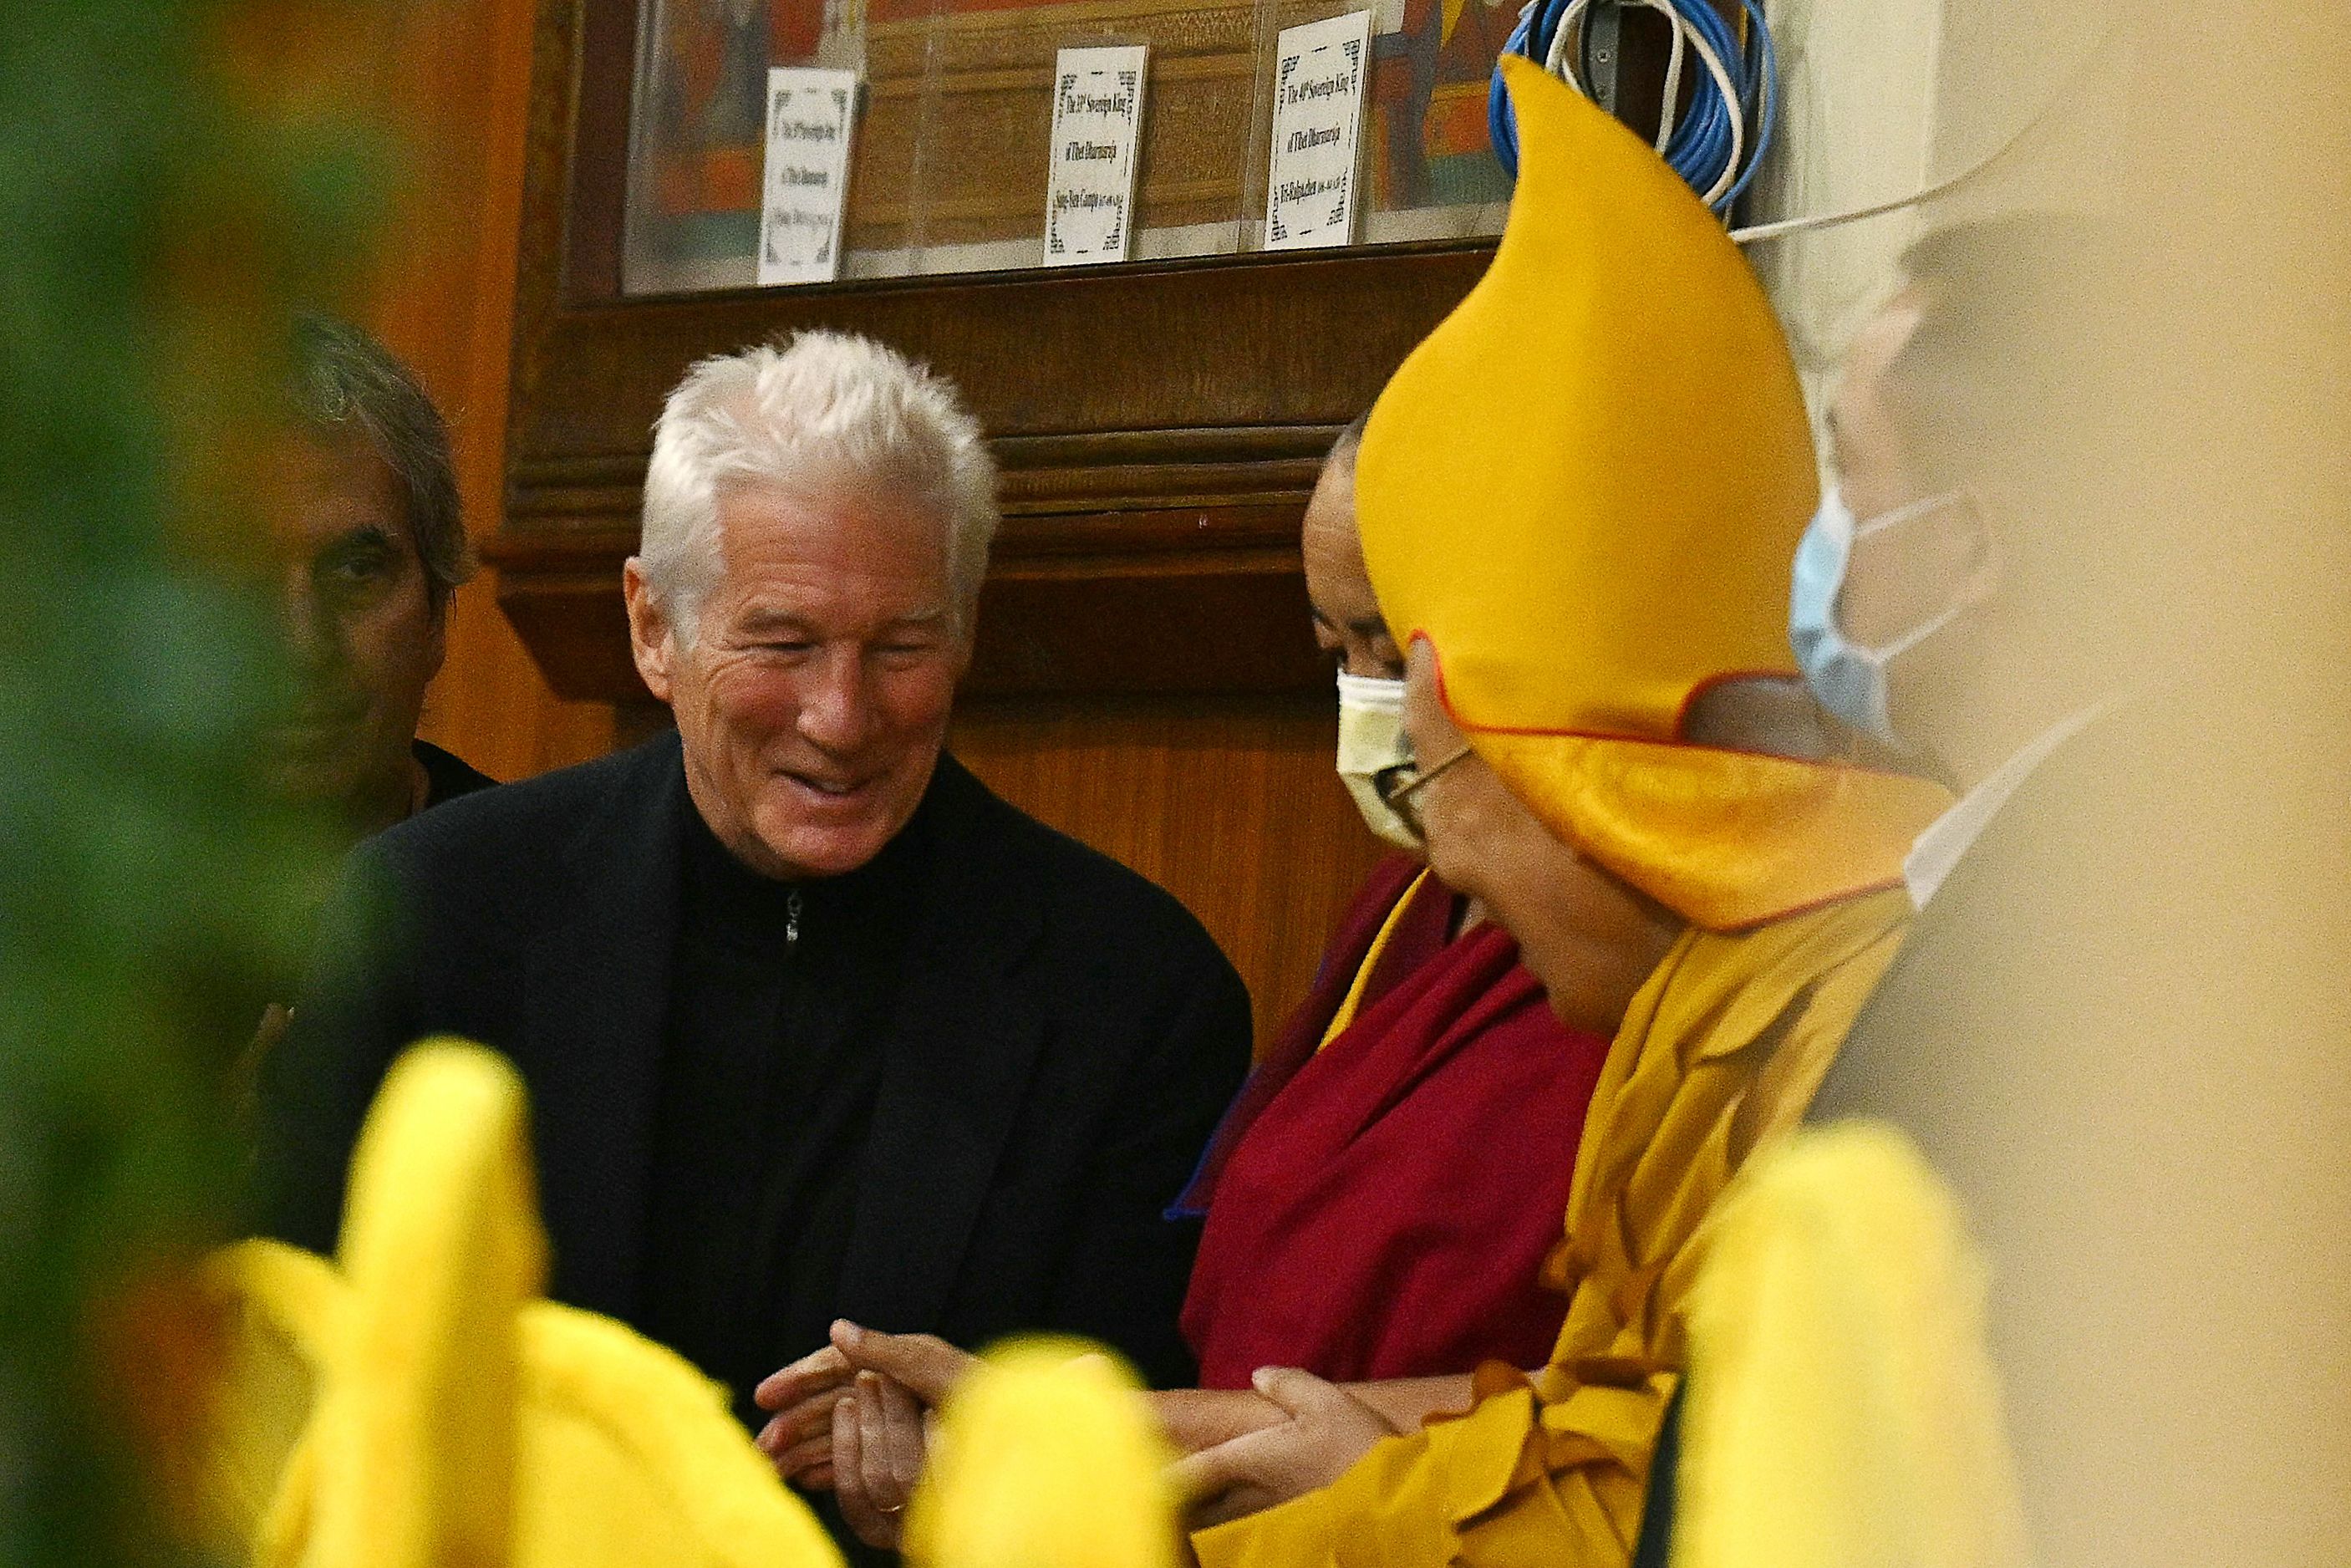 Richard Gere and Dalai Lama during a long life prayer at a temple on October 25, 2023 in McLeod Ganj, Dharamsala. | Source: Getty Images